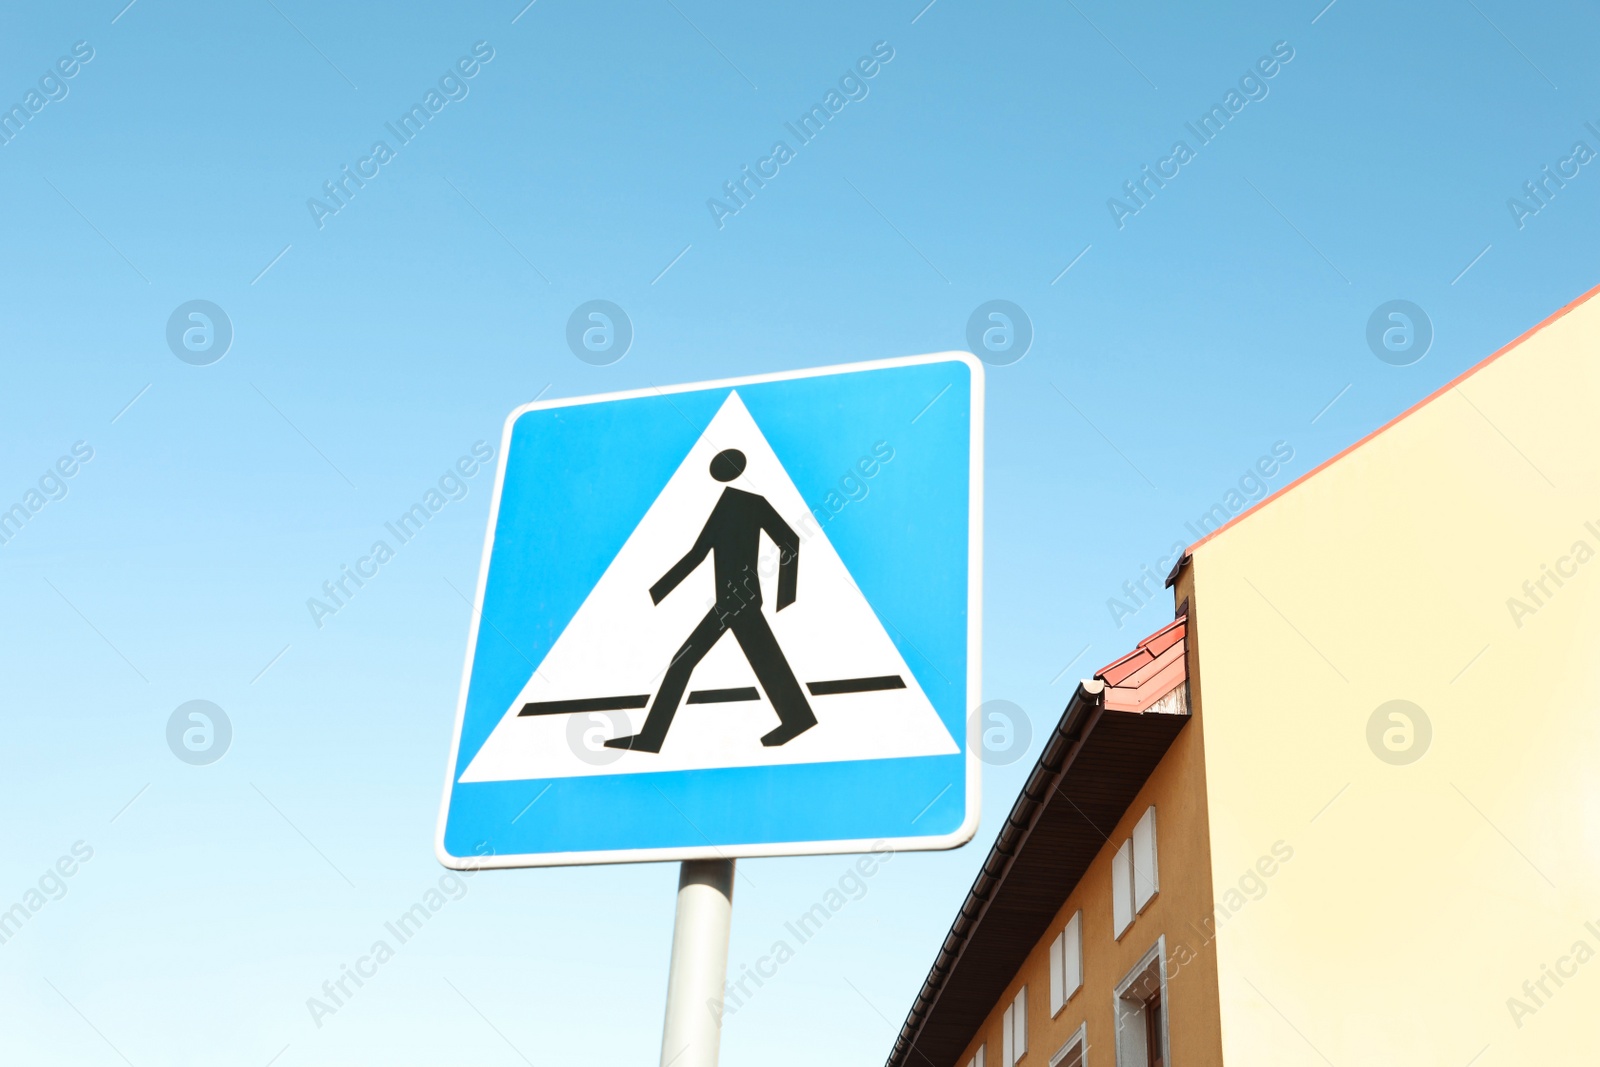 Photo of Traffic sign Pedestrian Crossing against blue sky, low angle view